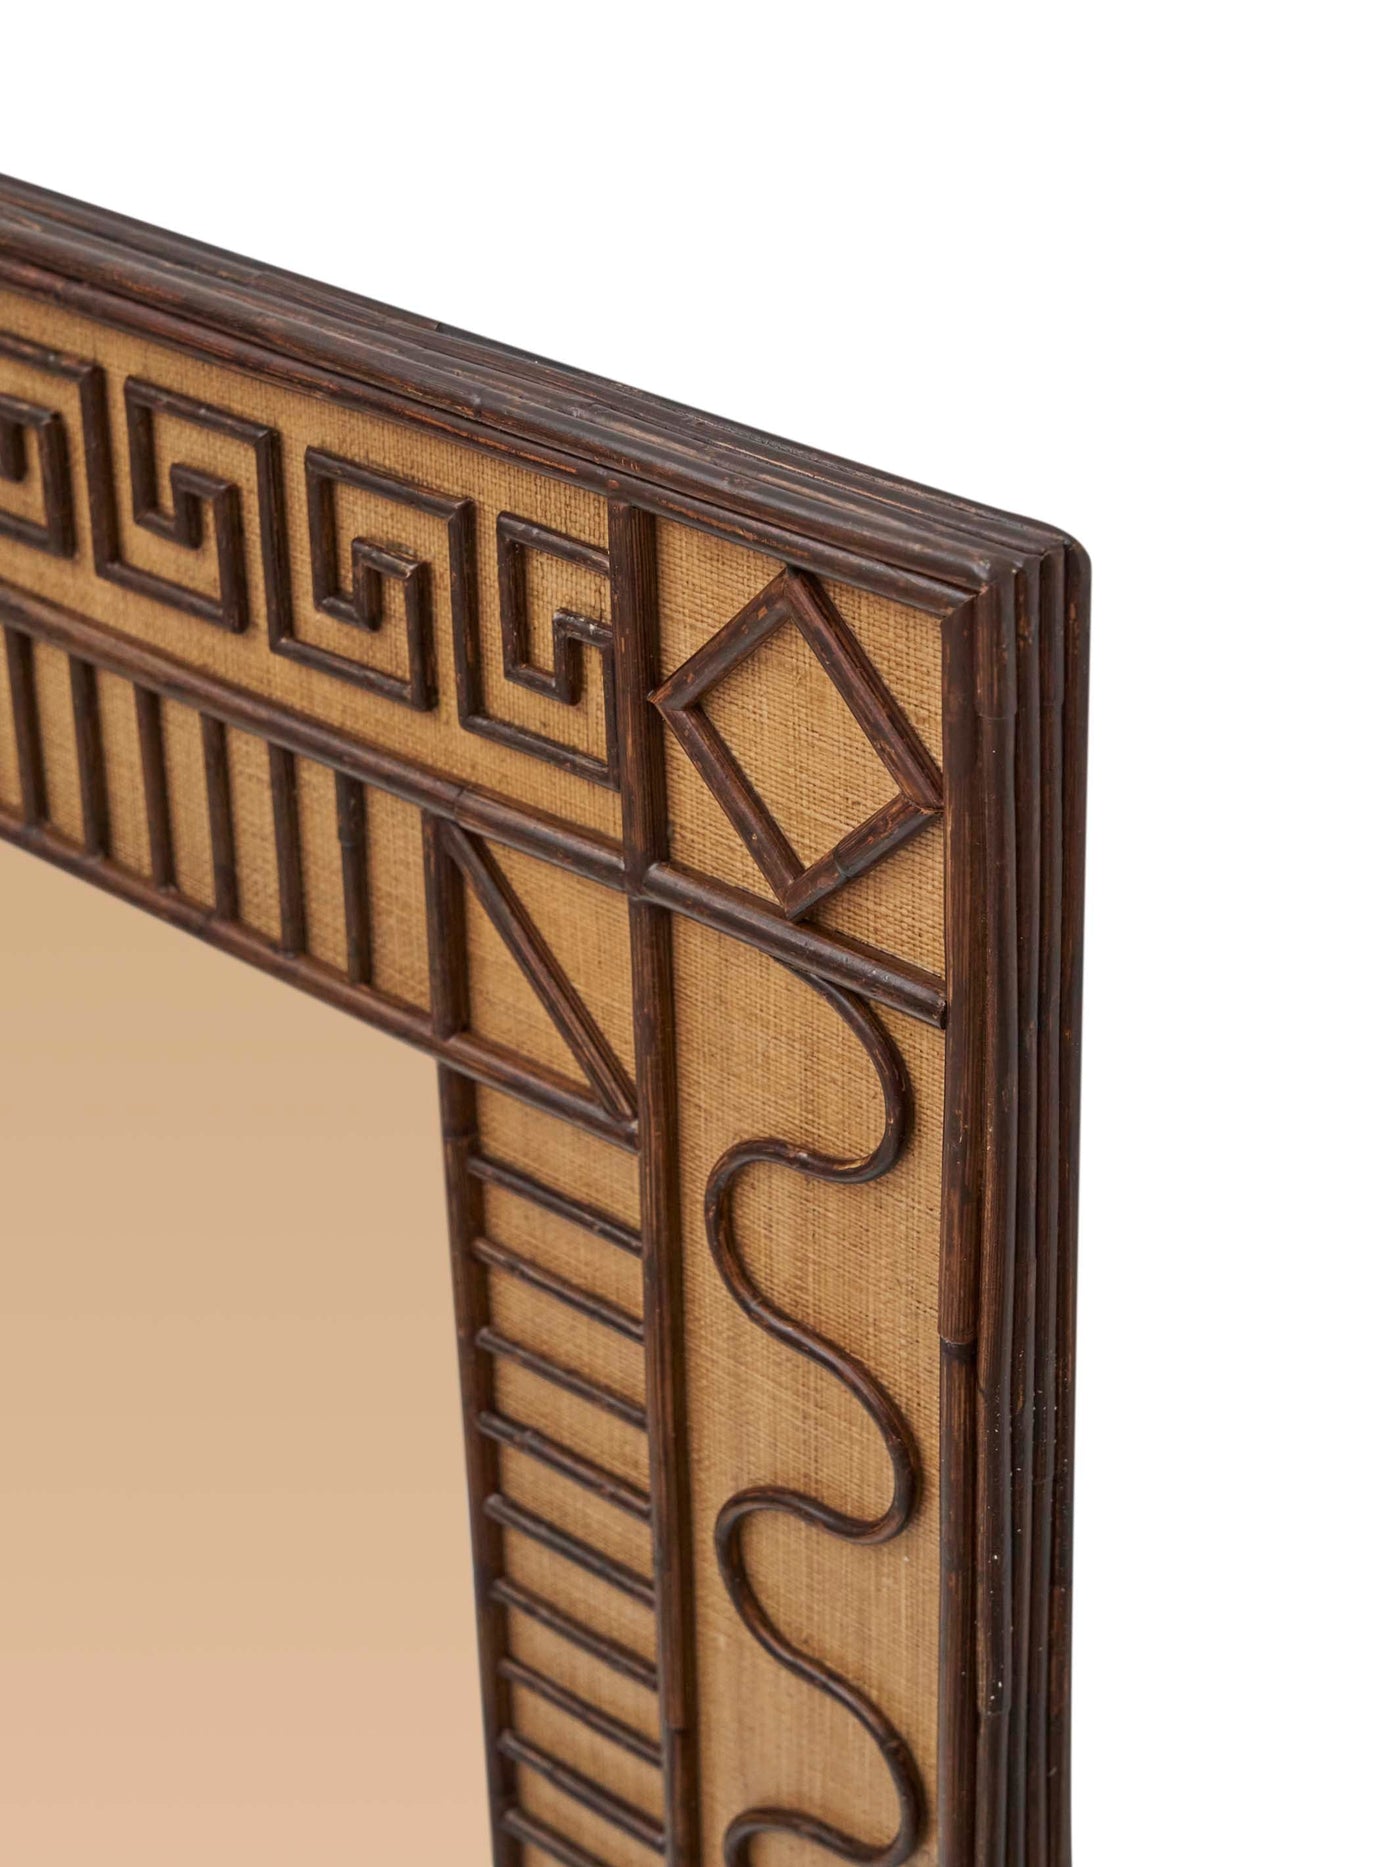 Alexandra Rattan Mirror in Brown by Permanent Resident